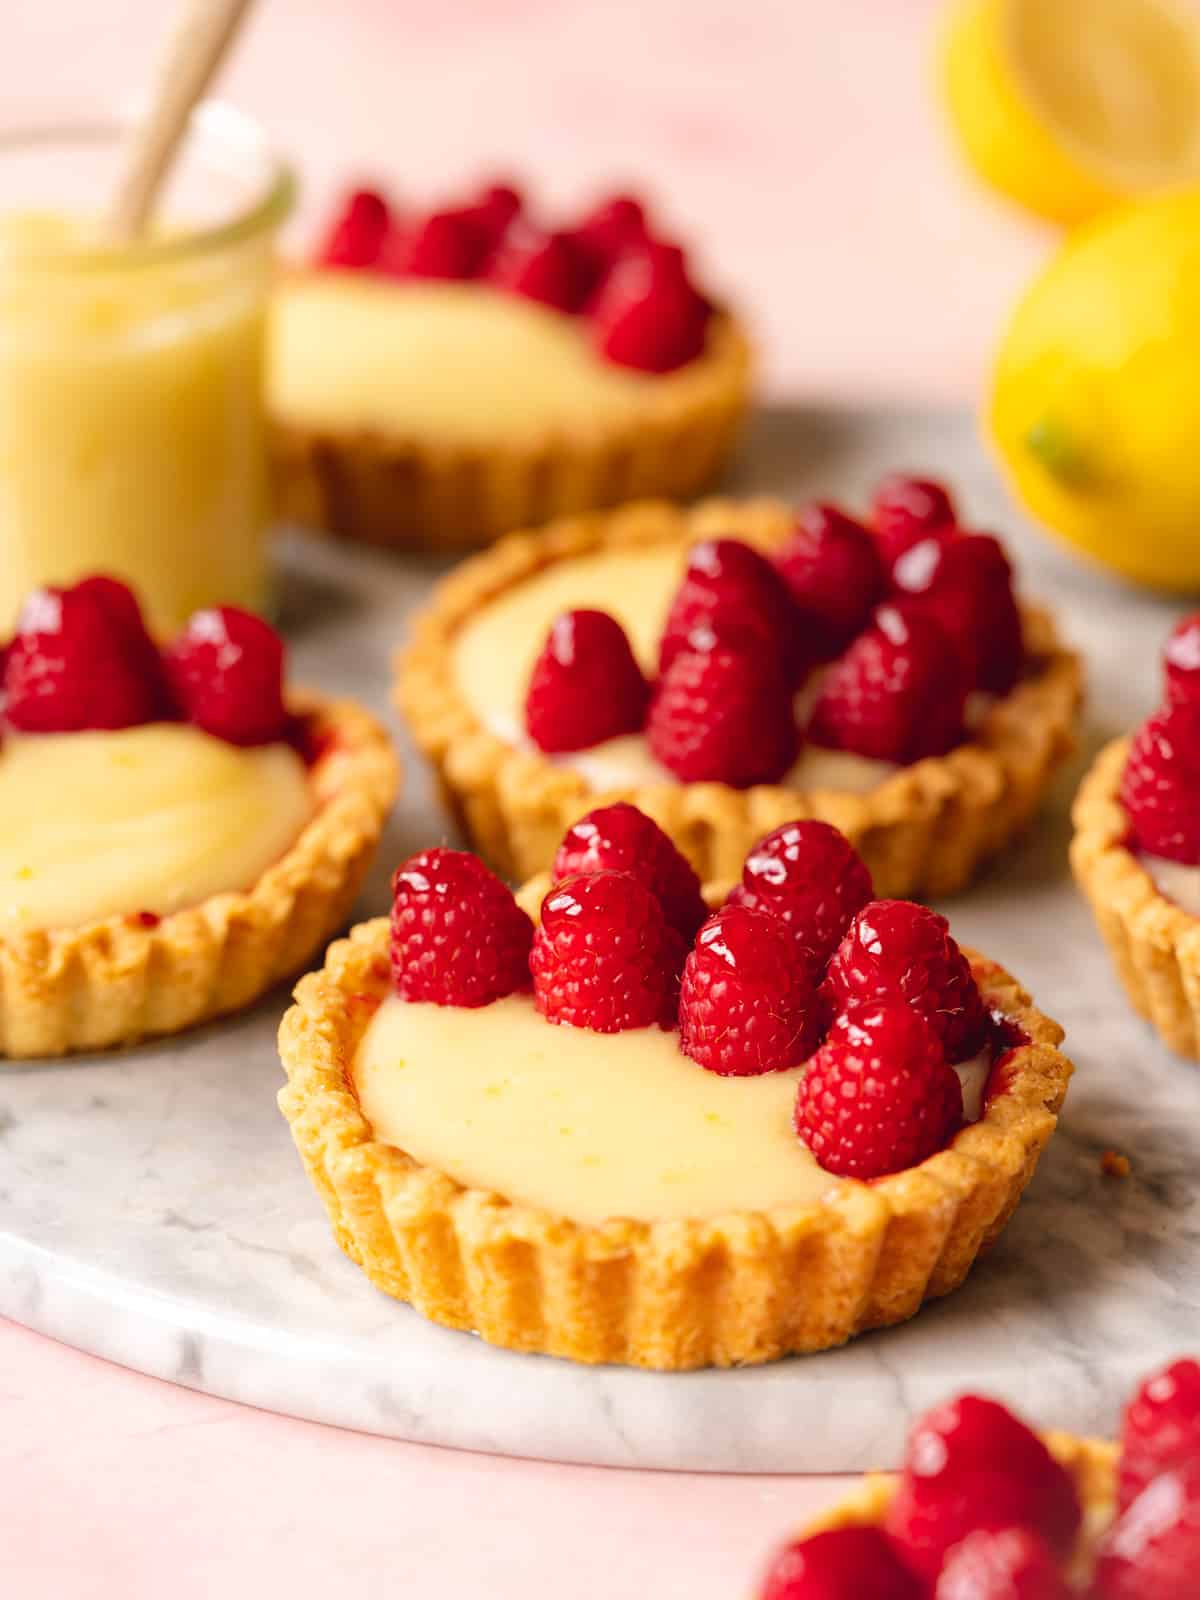 45 degree angle shot of several vegan lemon mini tarts topped with raspberries on a marble serving tray with a glass jar of lemon curd with a wooden spoon in it and several whole lemons in the background.